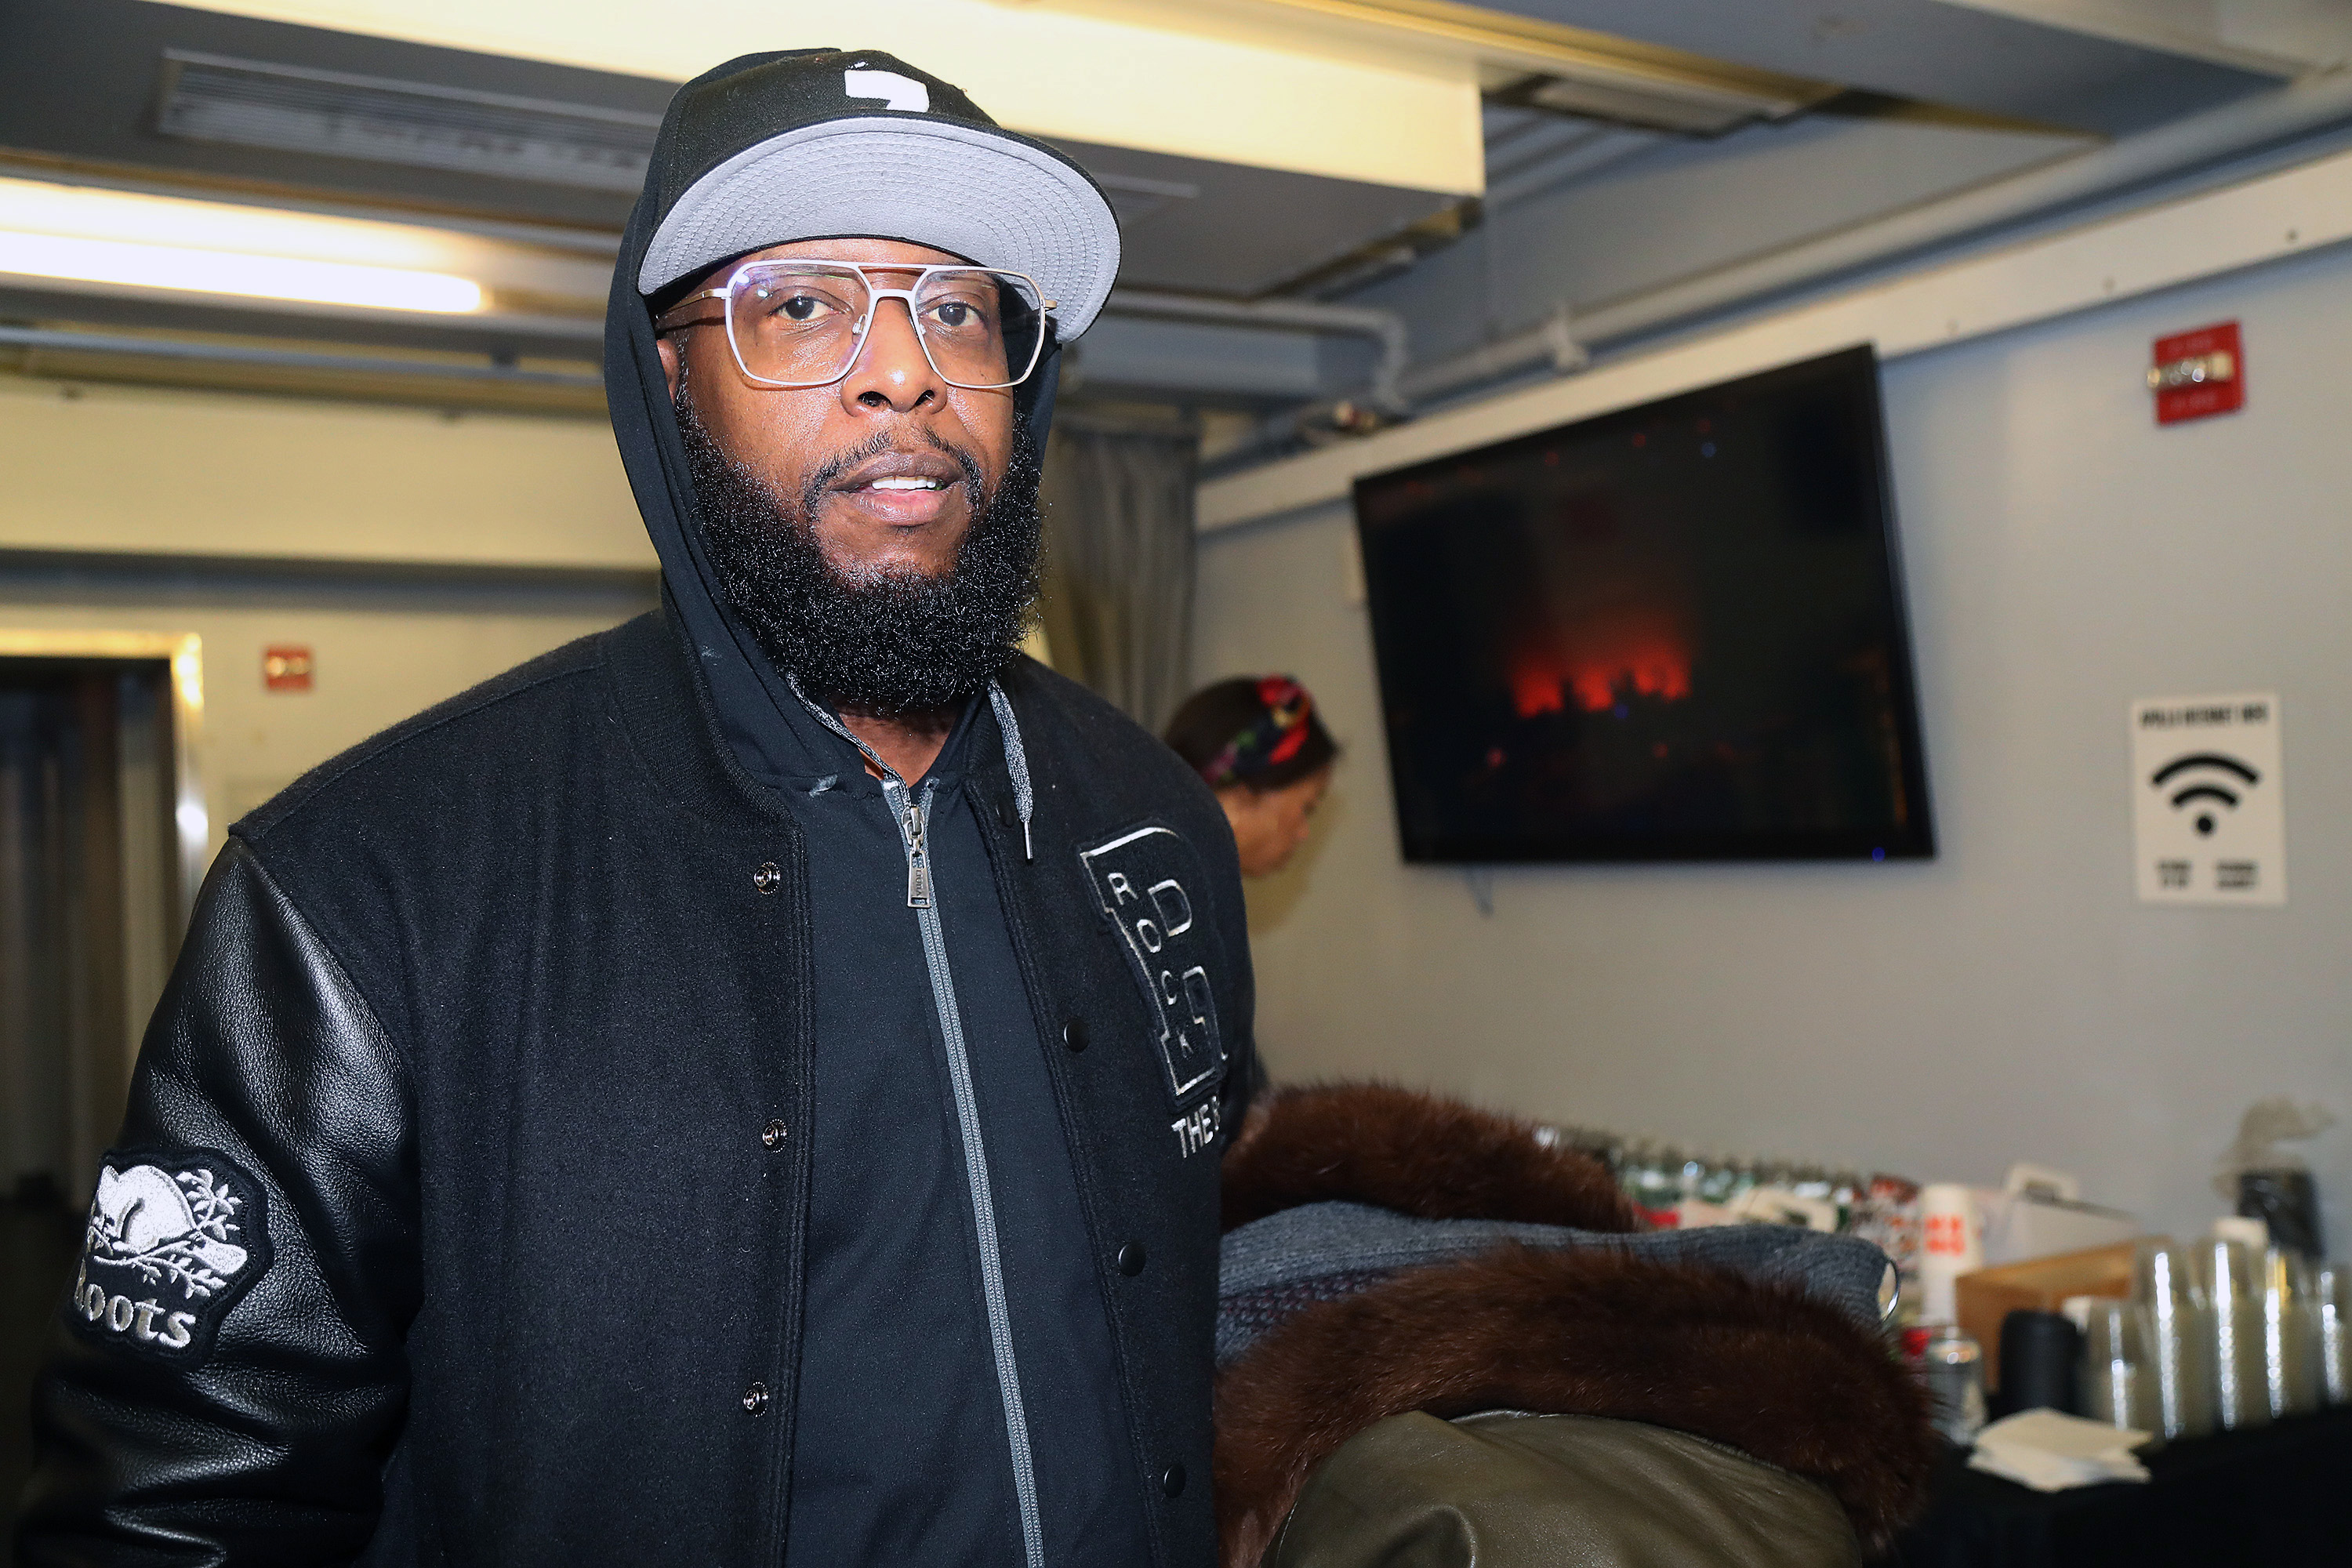 Rapper Talib Kweli appears backstage at City Winery Presents: Harry Belafonte's 93rd Birthday Celebration at The Apollo Theater on March 01, 2020 in New York City